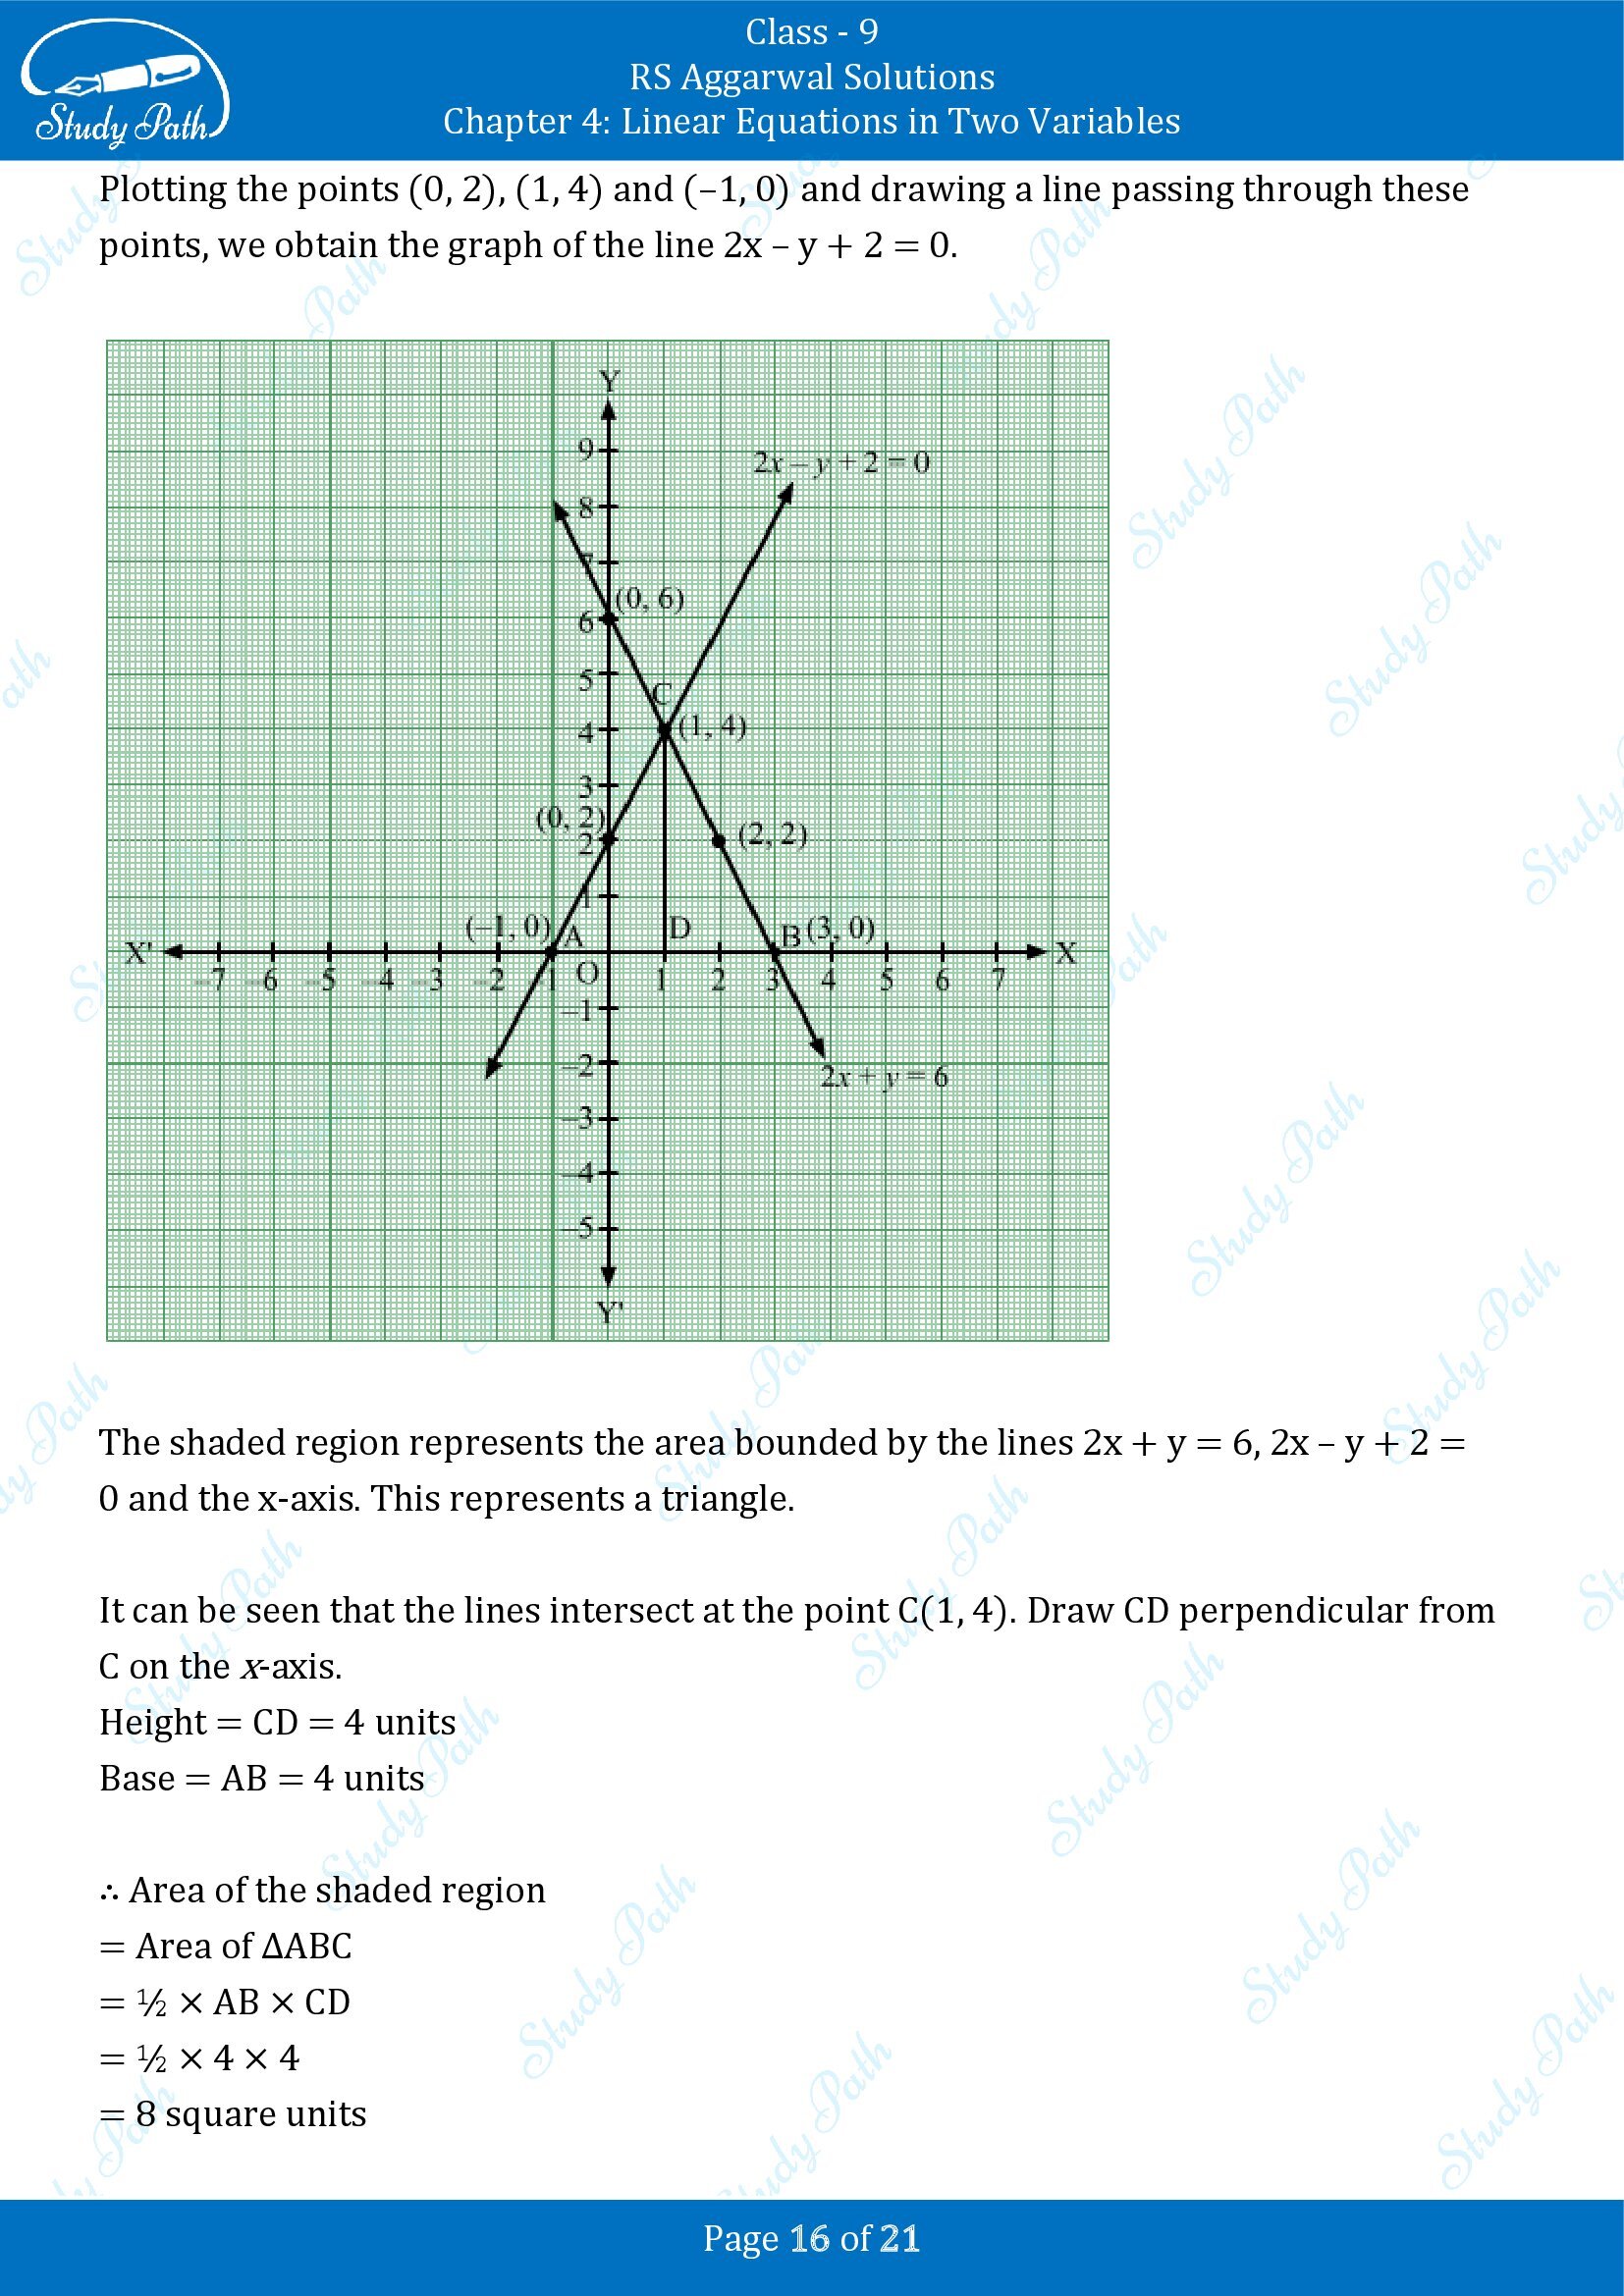 RS Aggarwal Solutions Class 9 Chapter 4 Linear Equations in Two Variables Exercise 4B 00016